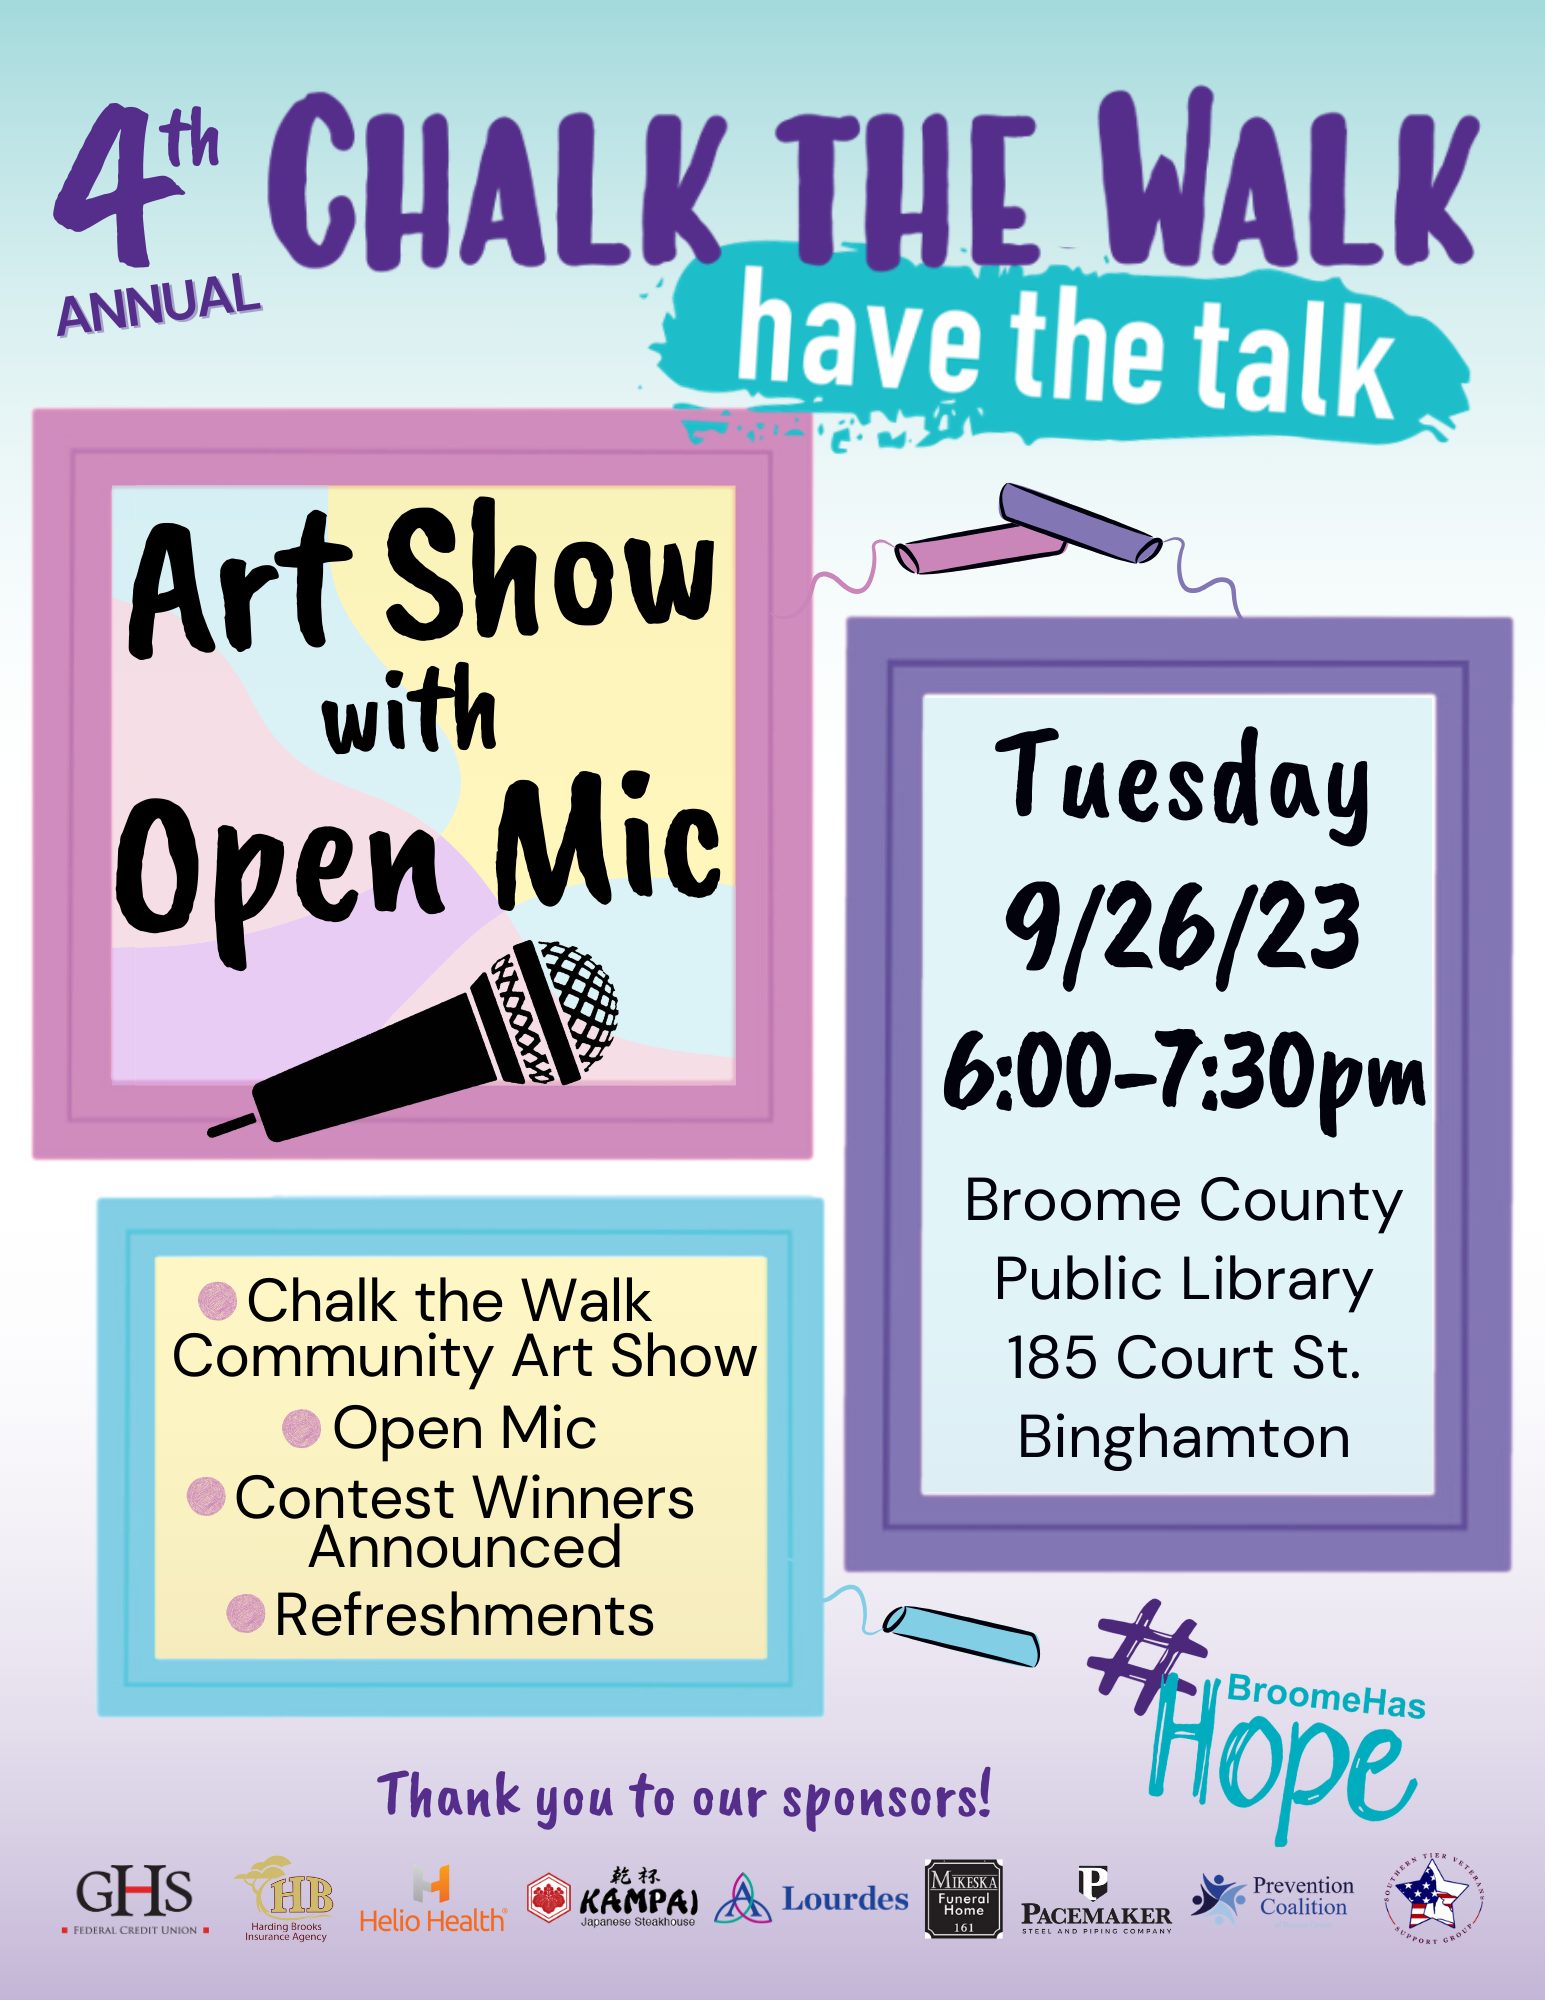 chalk the walk flyer with text similar to description